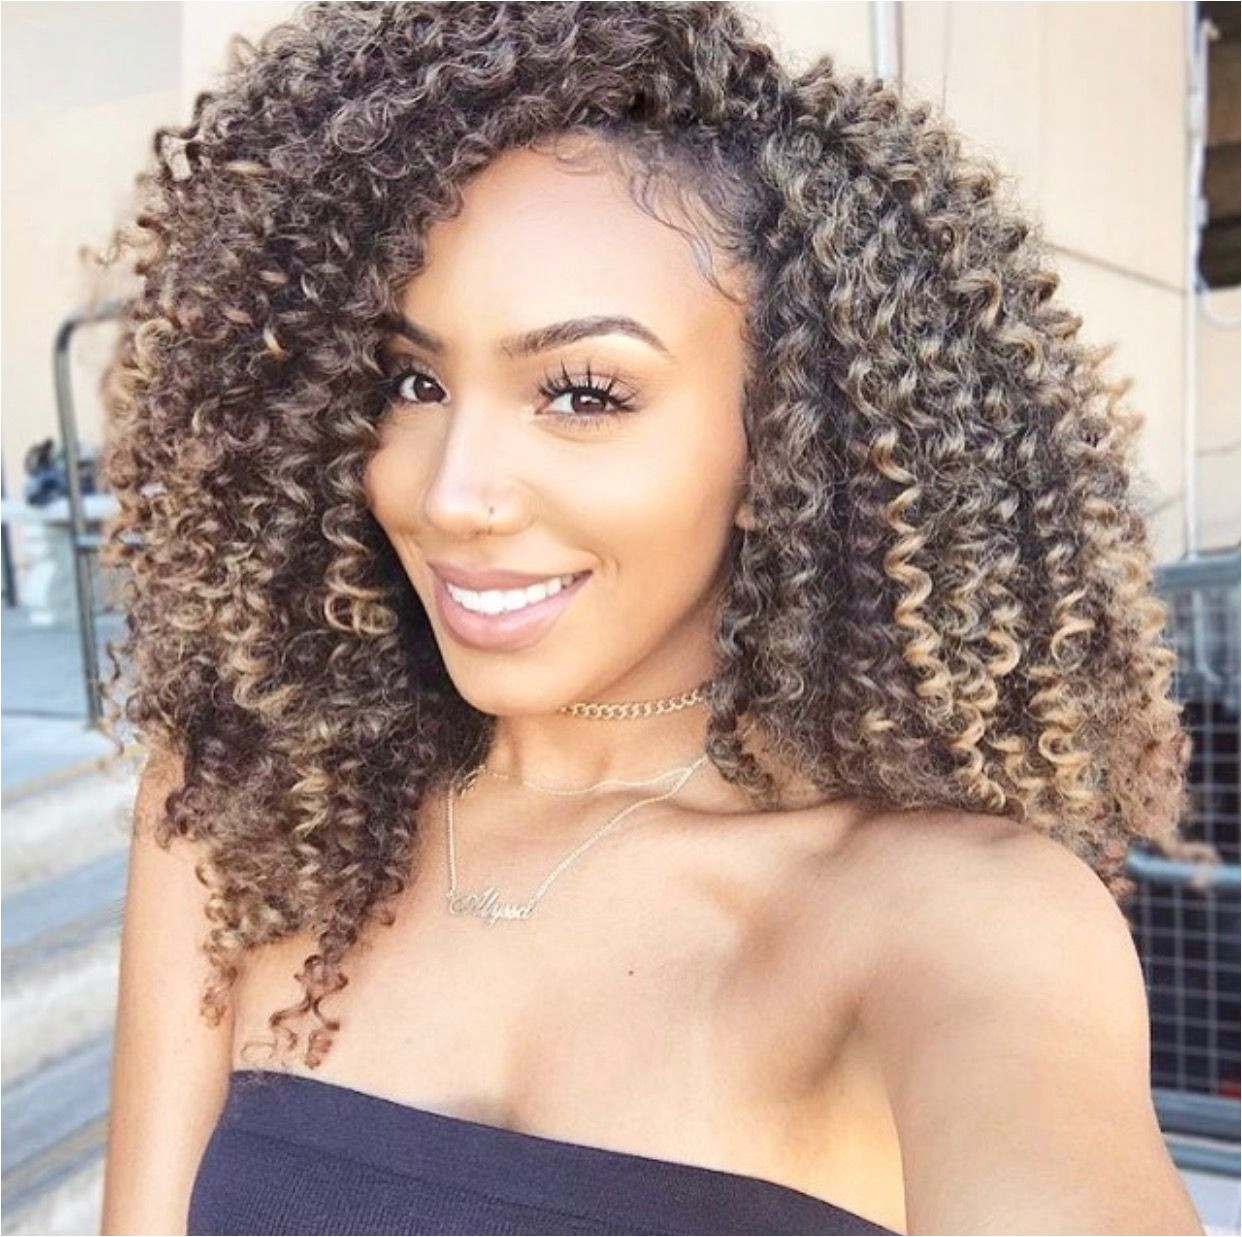 Crochet Braid – Hairstyle that you would definitely want to copy